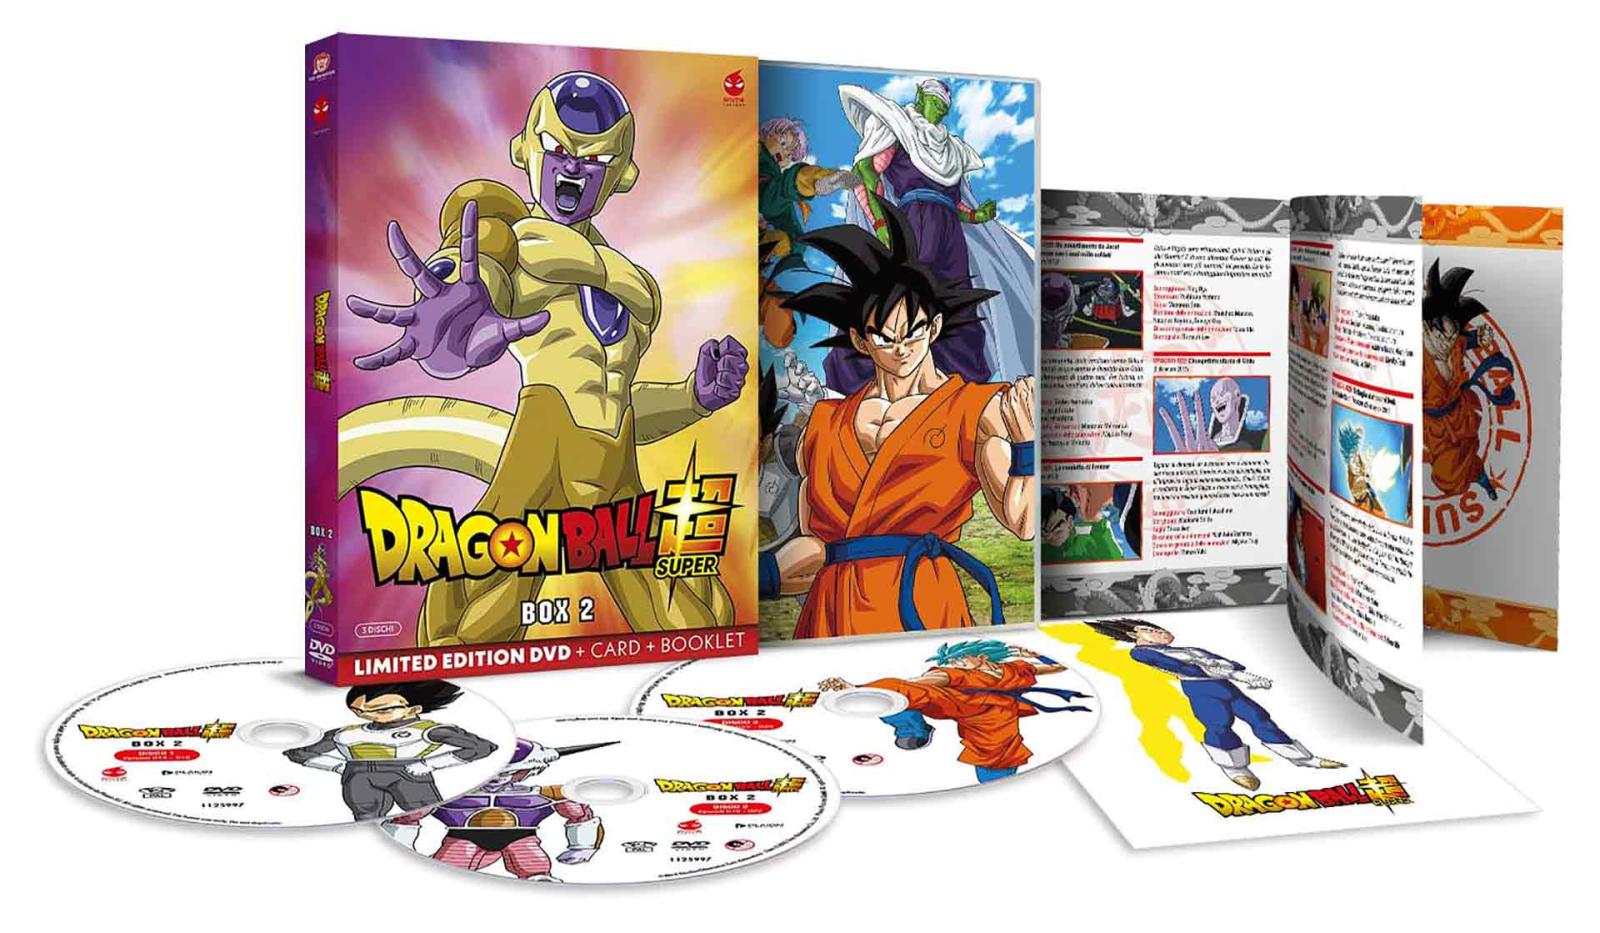 Dragon Ball Super - Volume 2 - Limited Edition 3 DVD + Booklet + Cards (DVD) Image 2